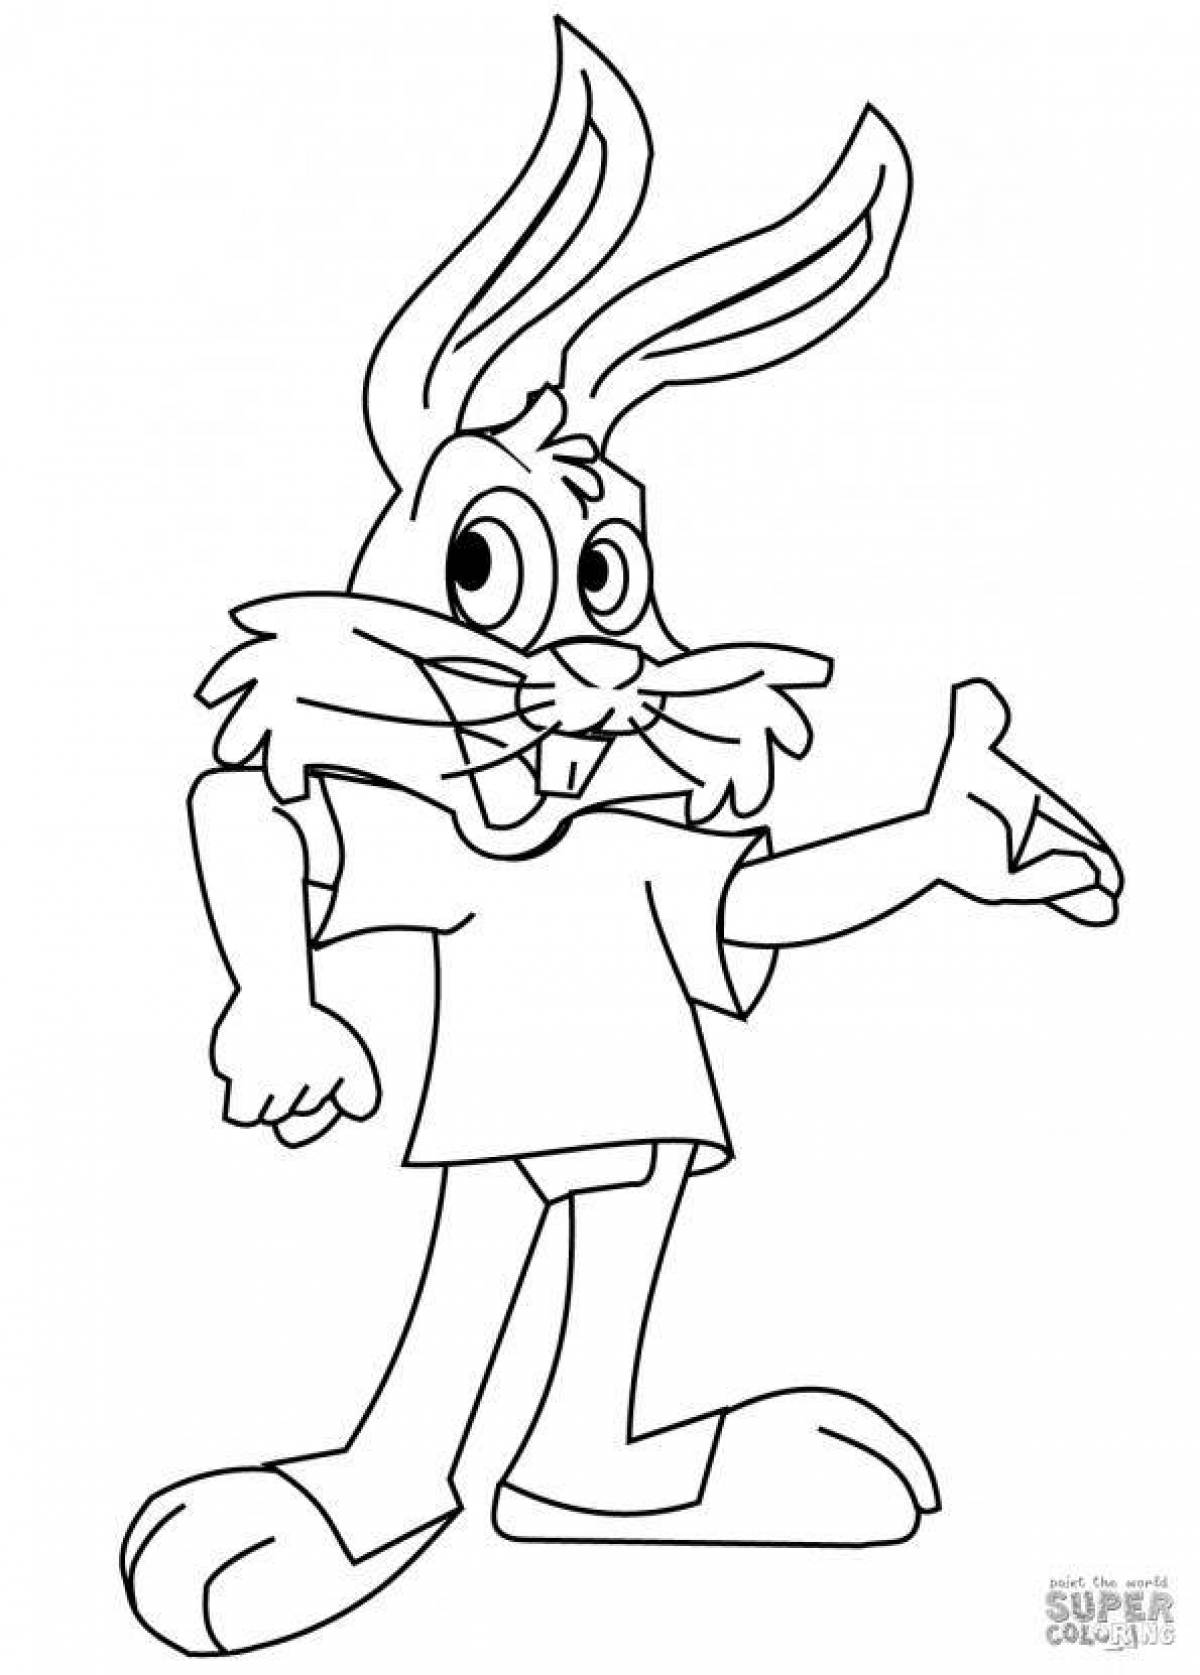 Magic animation coloring page